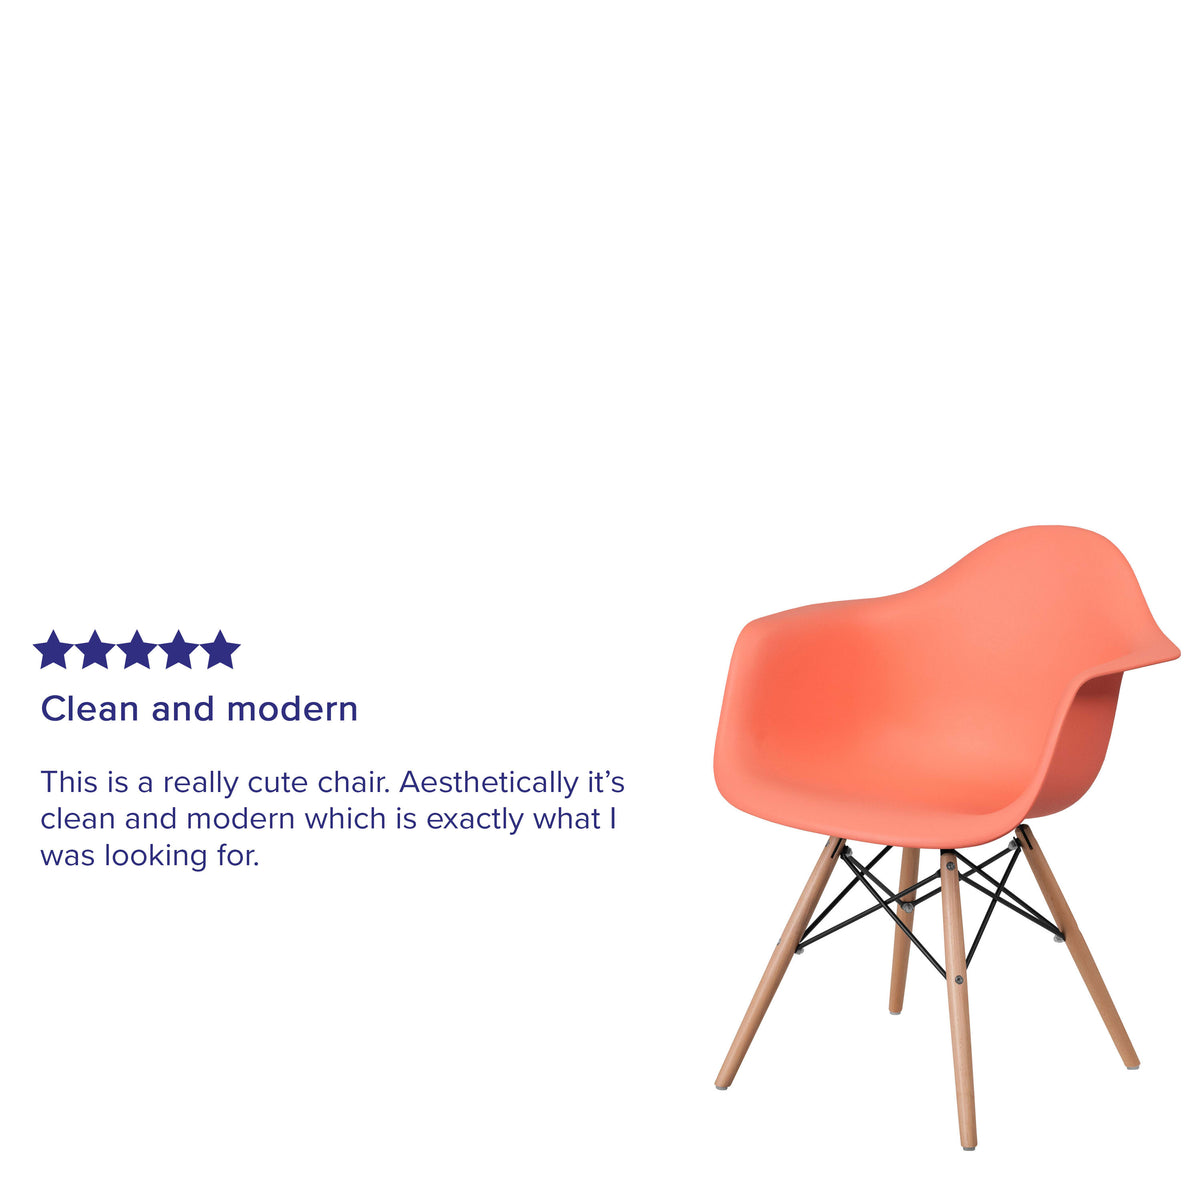 Peach |#| Peach Plastic Chair with Arms and Wooden Legs - Accent & Side Chair